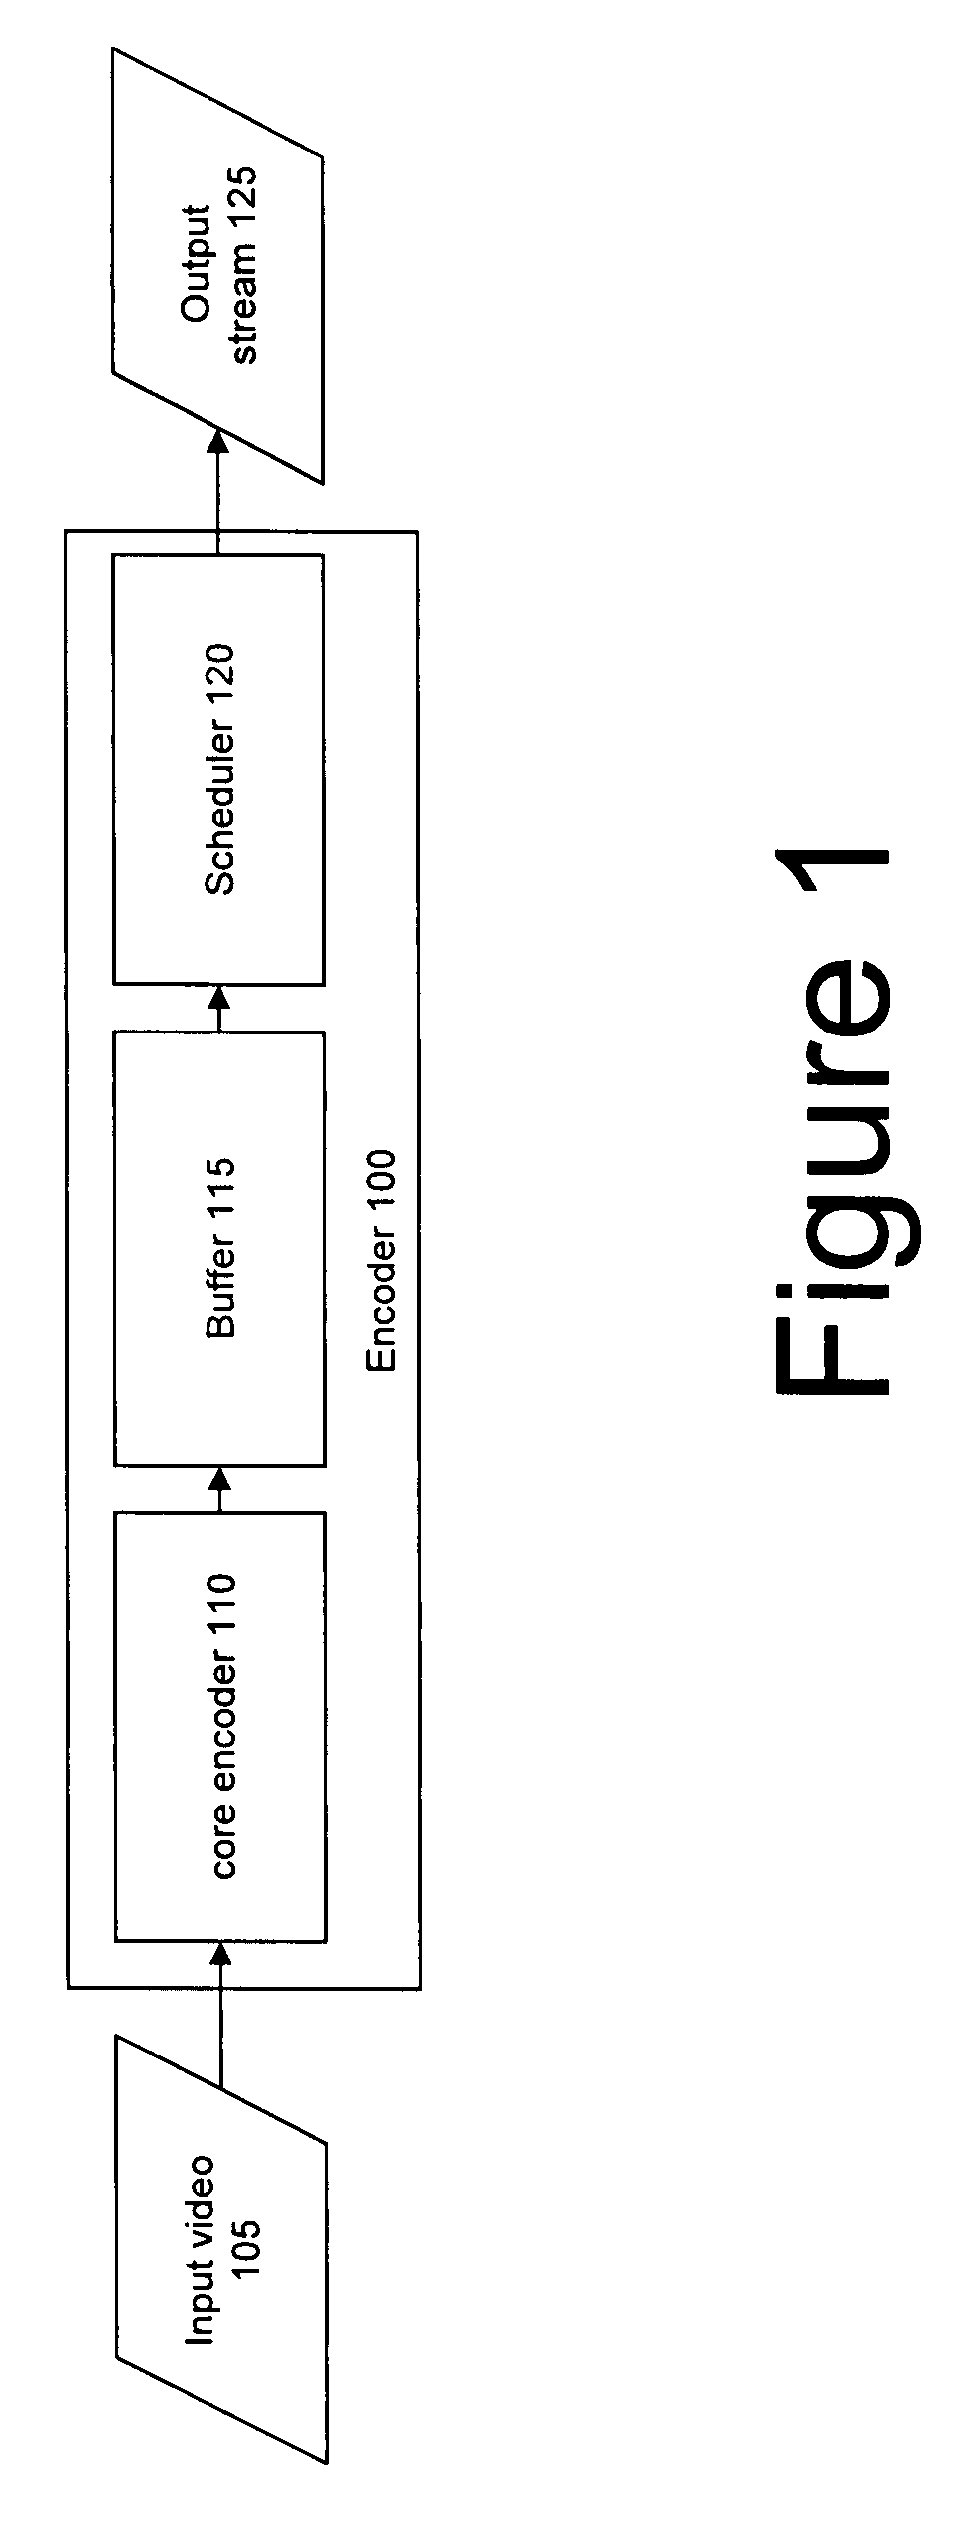 Video Quality of Service Management and Constrained Fidelity Constant Bit Rate Video Encoding Systems and Method